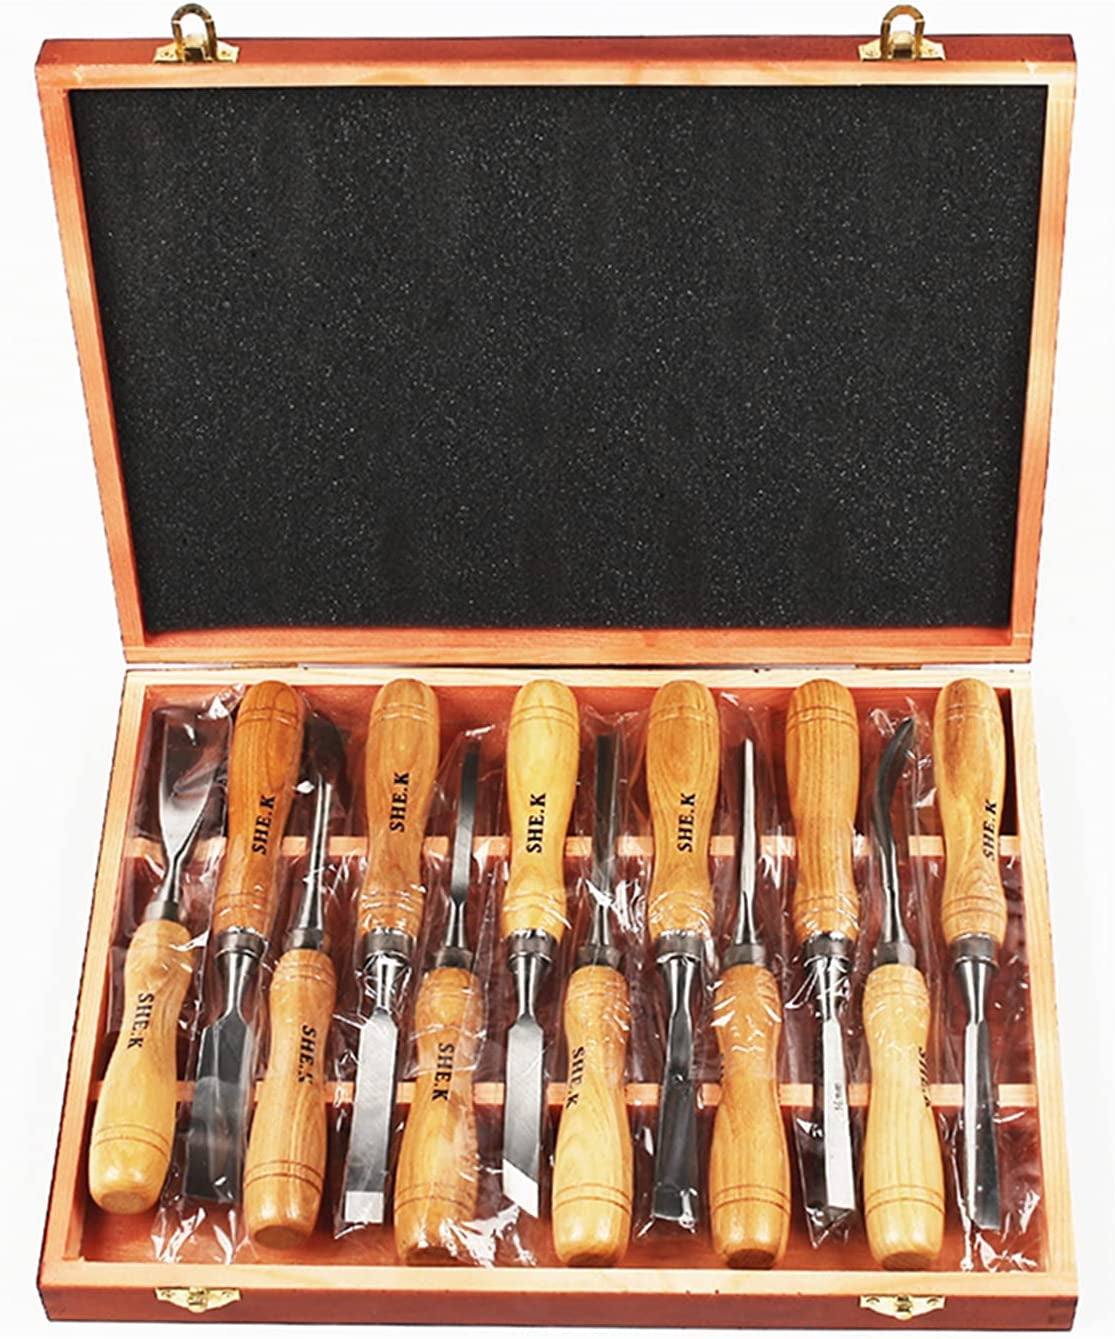 Nisorpa, Nisorpa 12Pcs Wood Carving Chisel Tool Set Woodworking Gouge Hand Craft with Box DIY Hand Tool Gouged Timber Carpentry